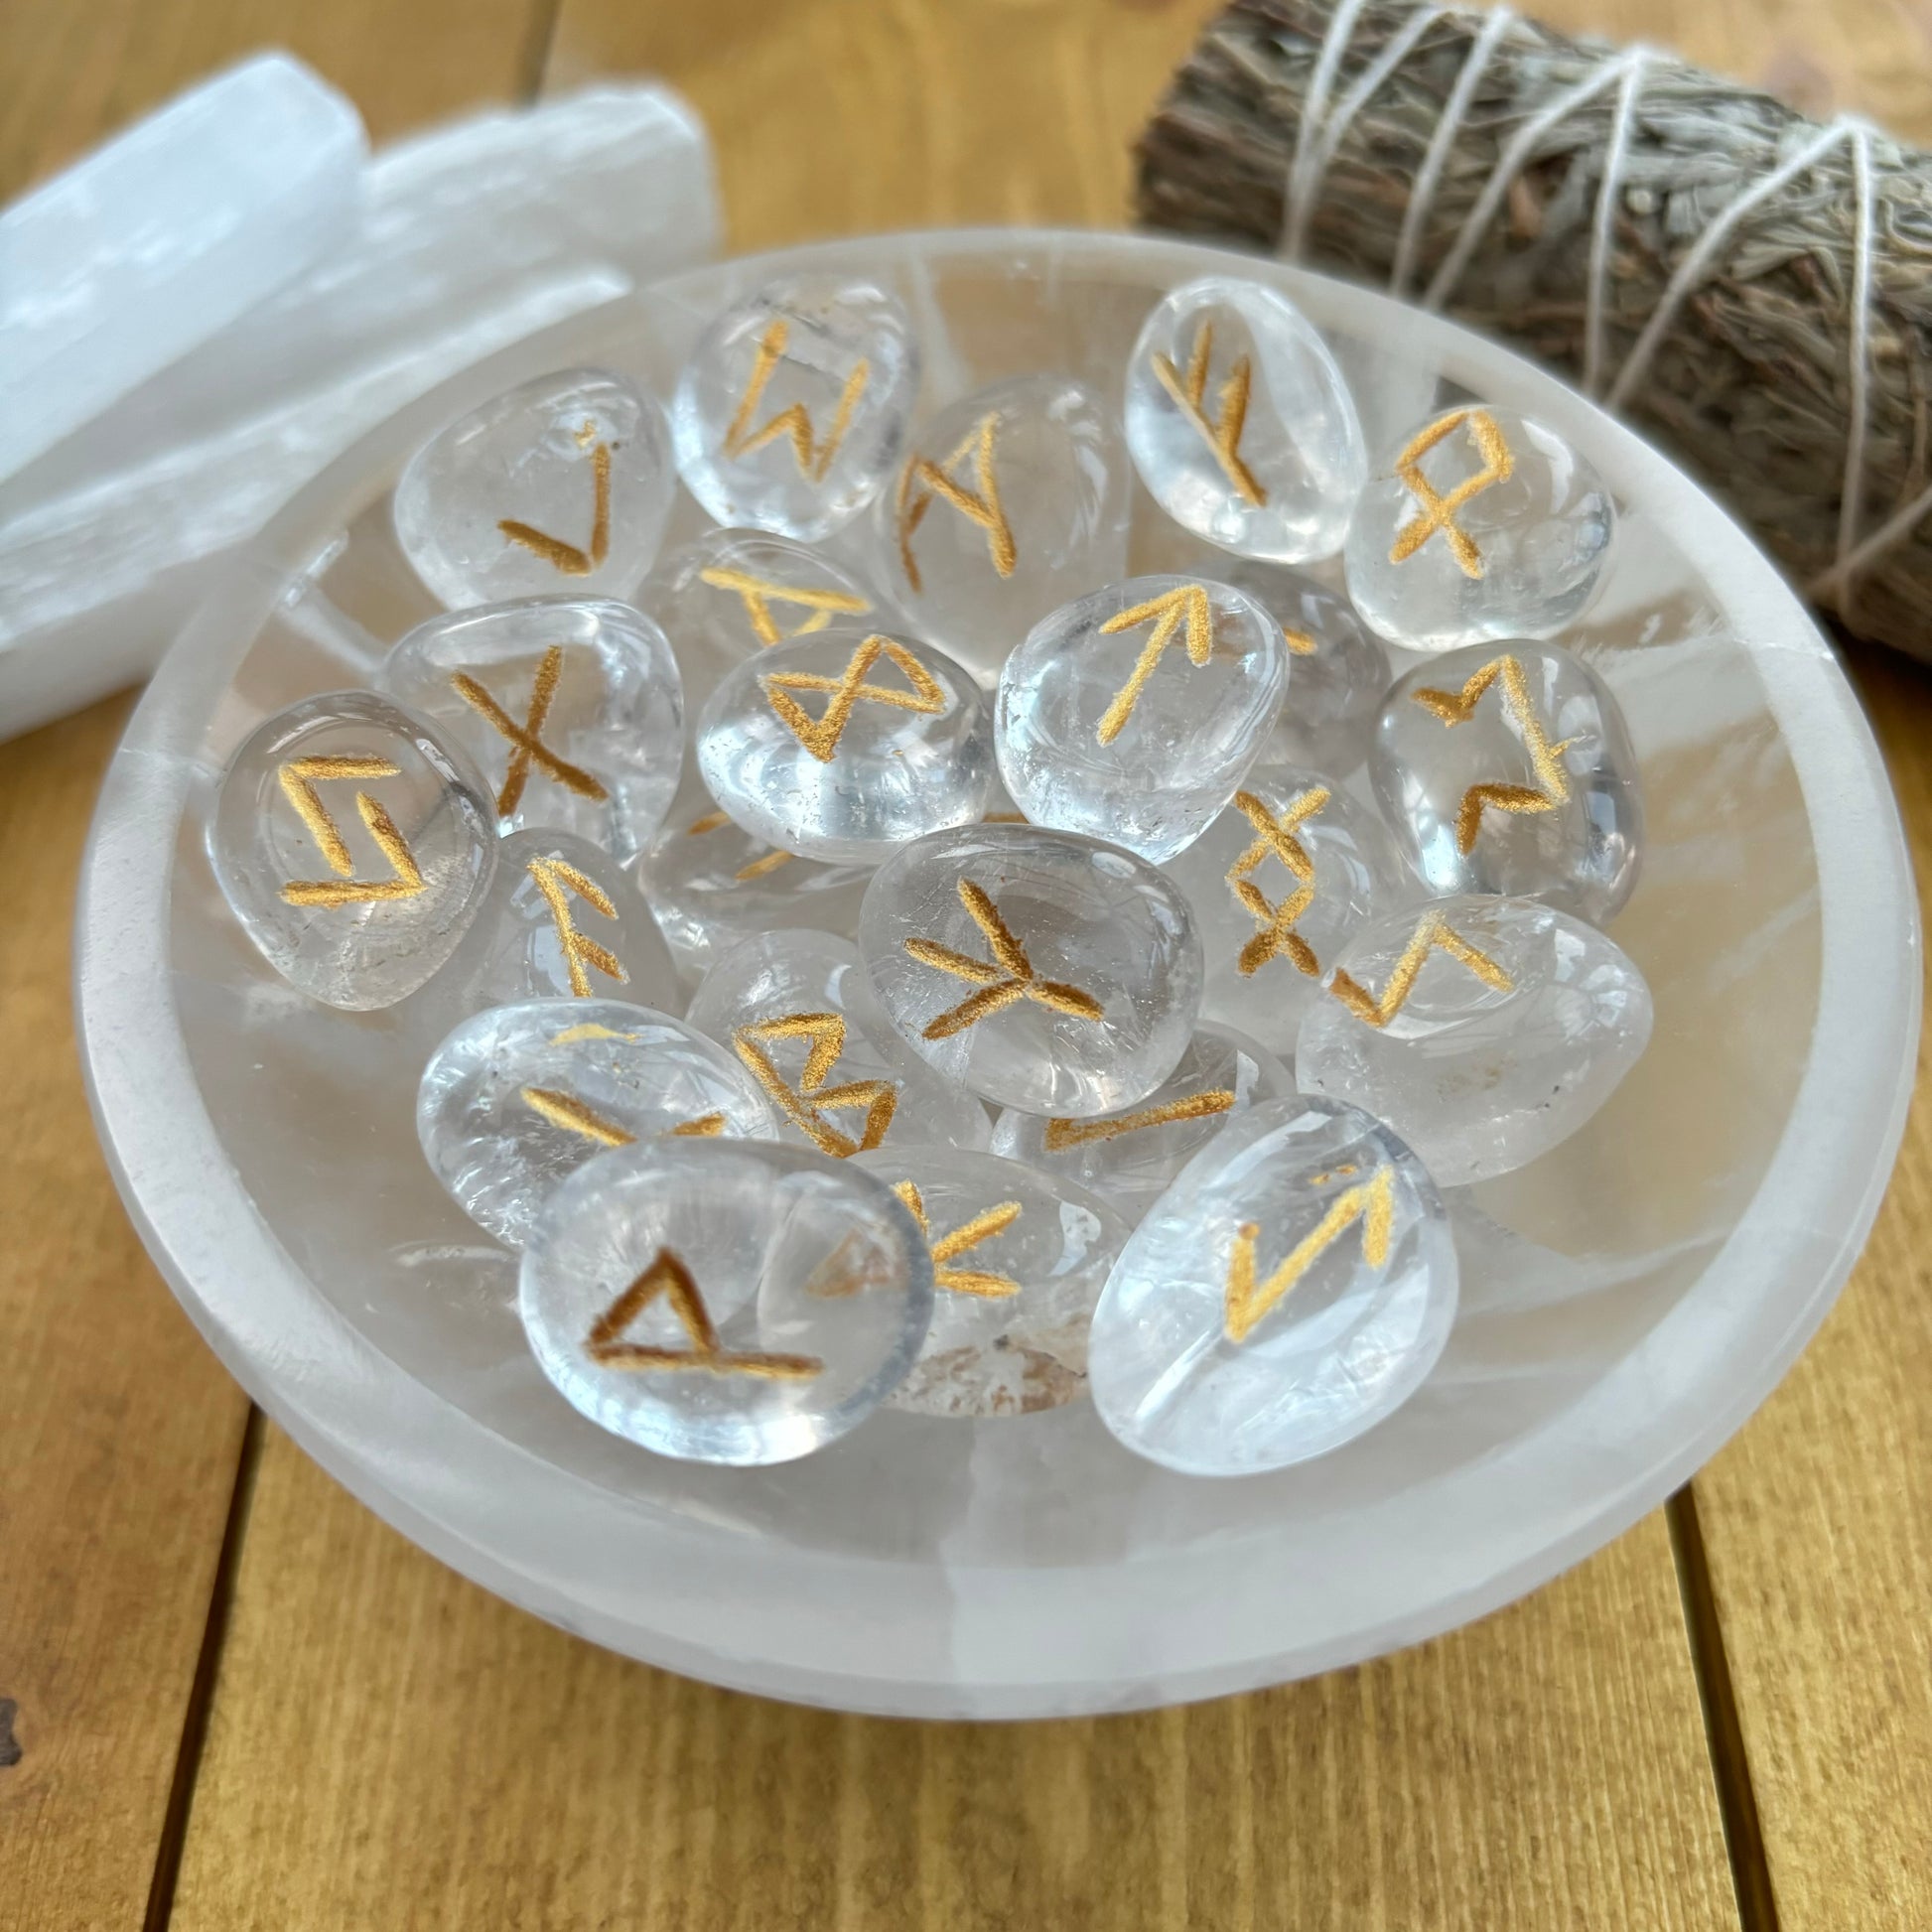 Complete Set of Clear Quartz Crystal Runes With Pouch